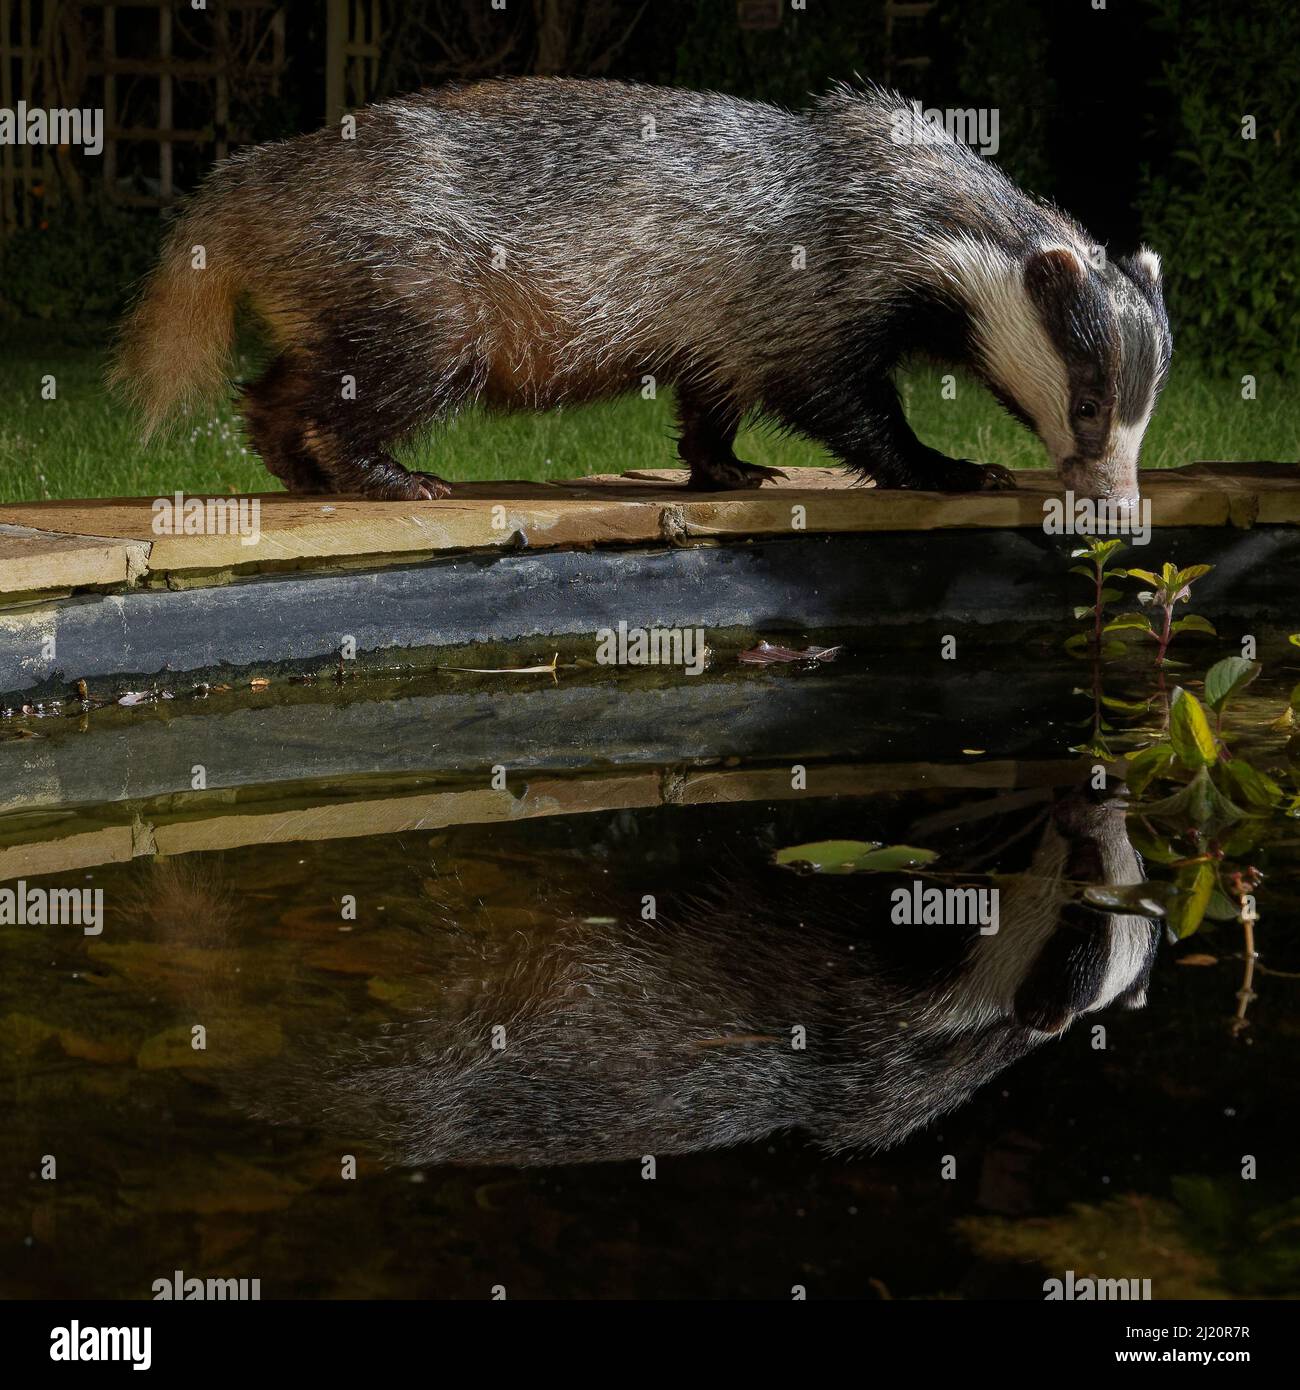 European badger (Meles meles) reflected in a garden pond it is visiting to drink from at night, Wiltshire, UK, June. Property released. Stock Photo